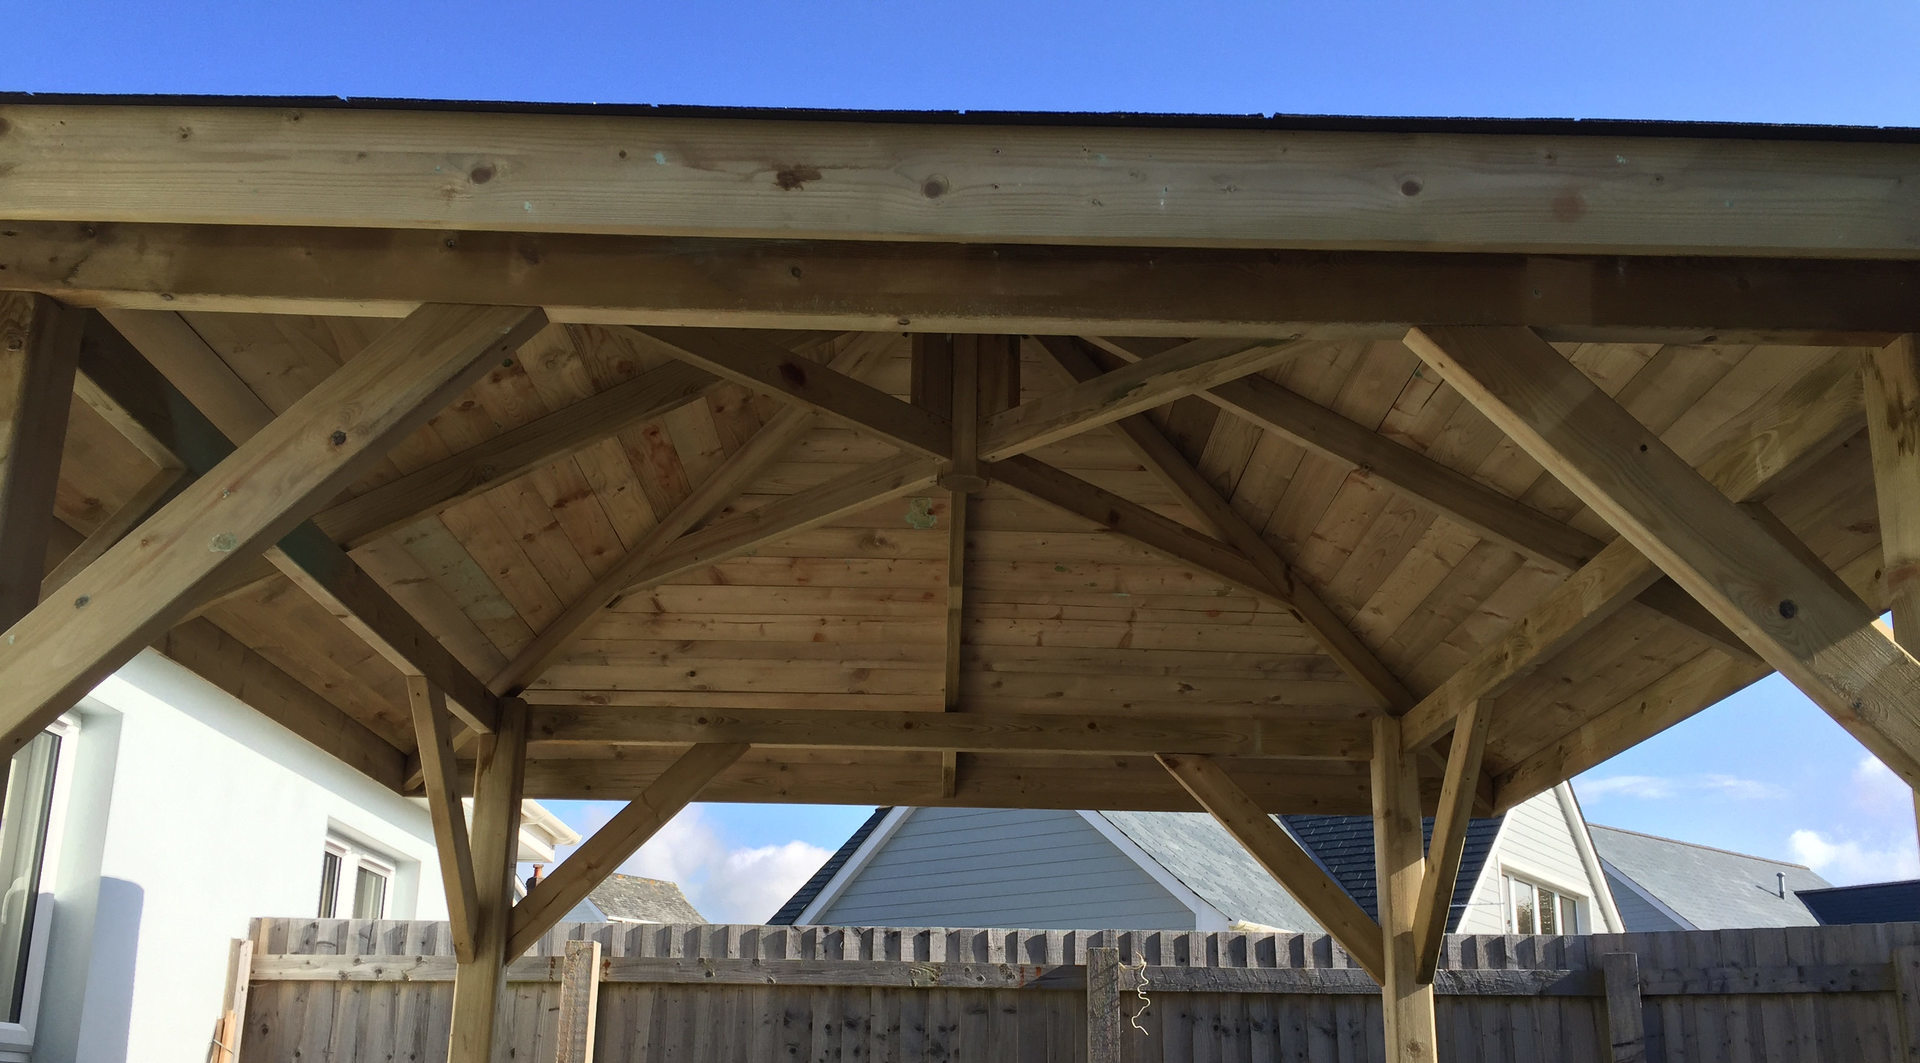 Gazebo from underneath showing detail. All works carried out and managed built and designed by MJS Building and Maintenance Ltd.